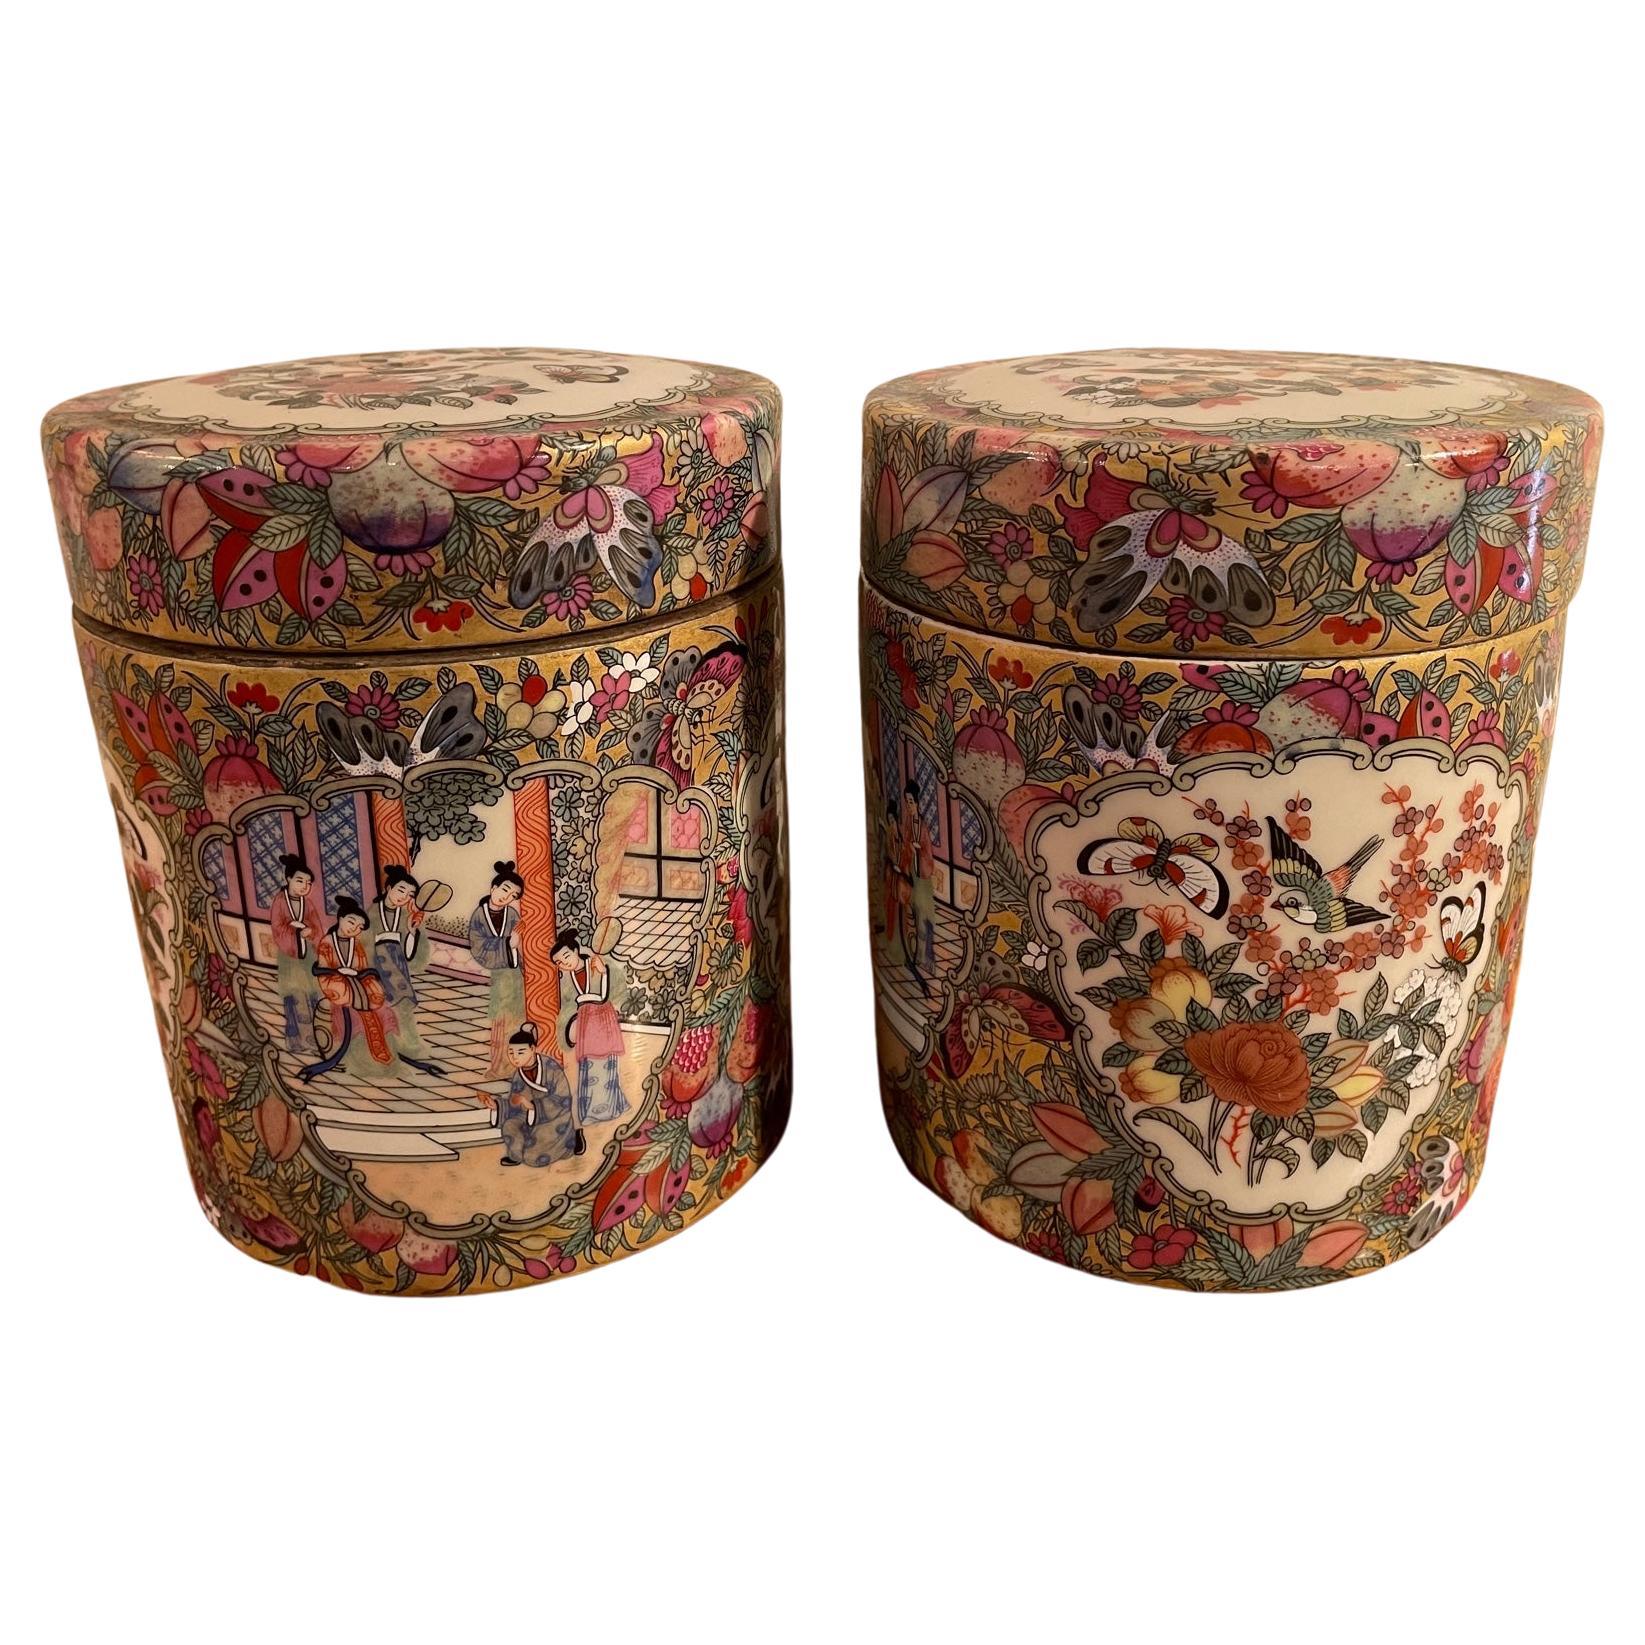 Early 20th century Chinese Canton Porcelain Pair of Tobacco Boxe, 1900s